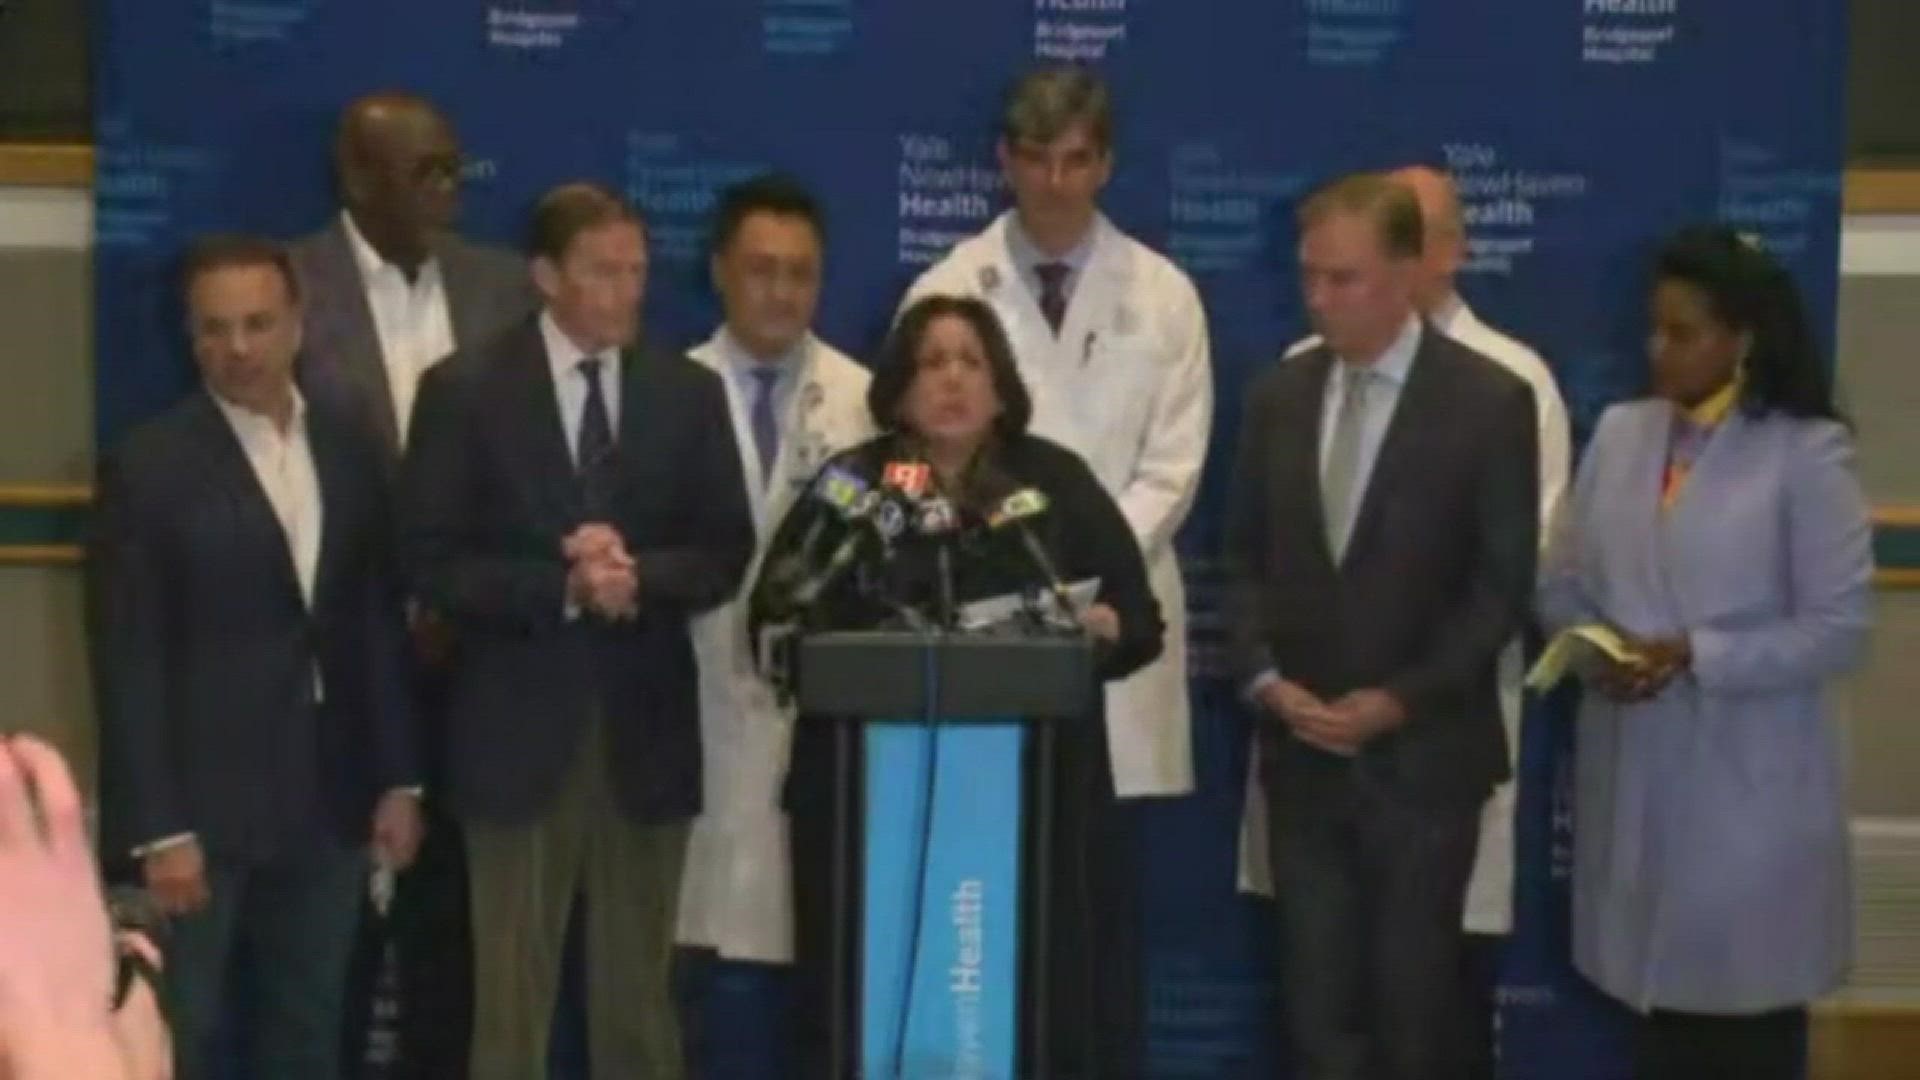 This is the second case connected to Connecticut. Officials say the individual didn't show signs or symptoms while with patients and stayed home to self-monitor.